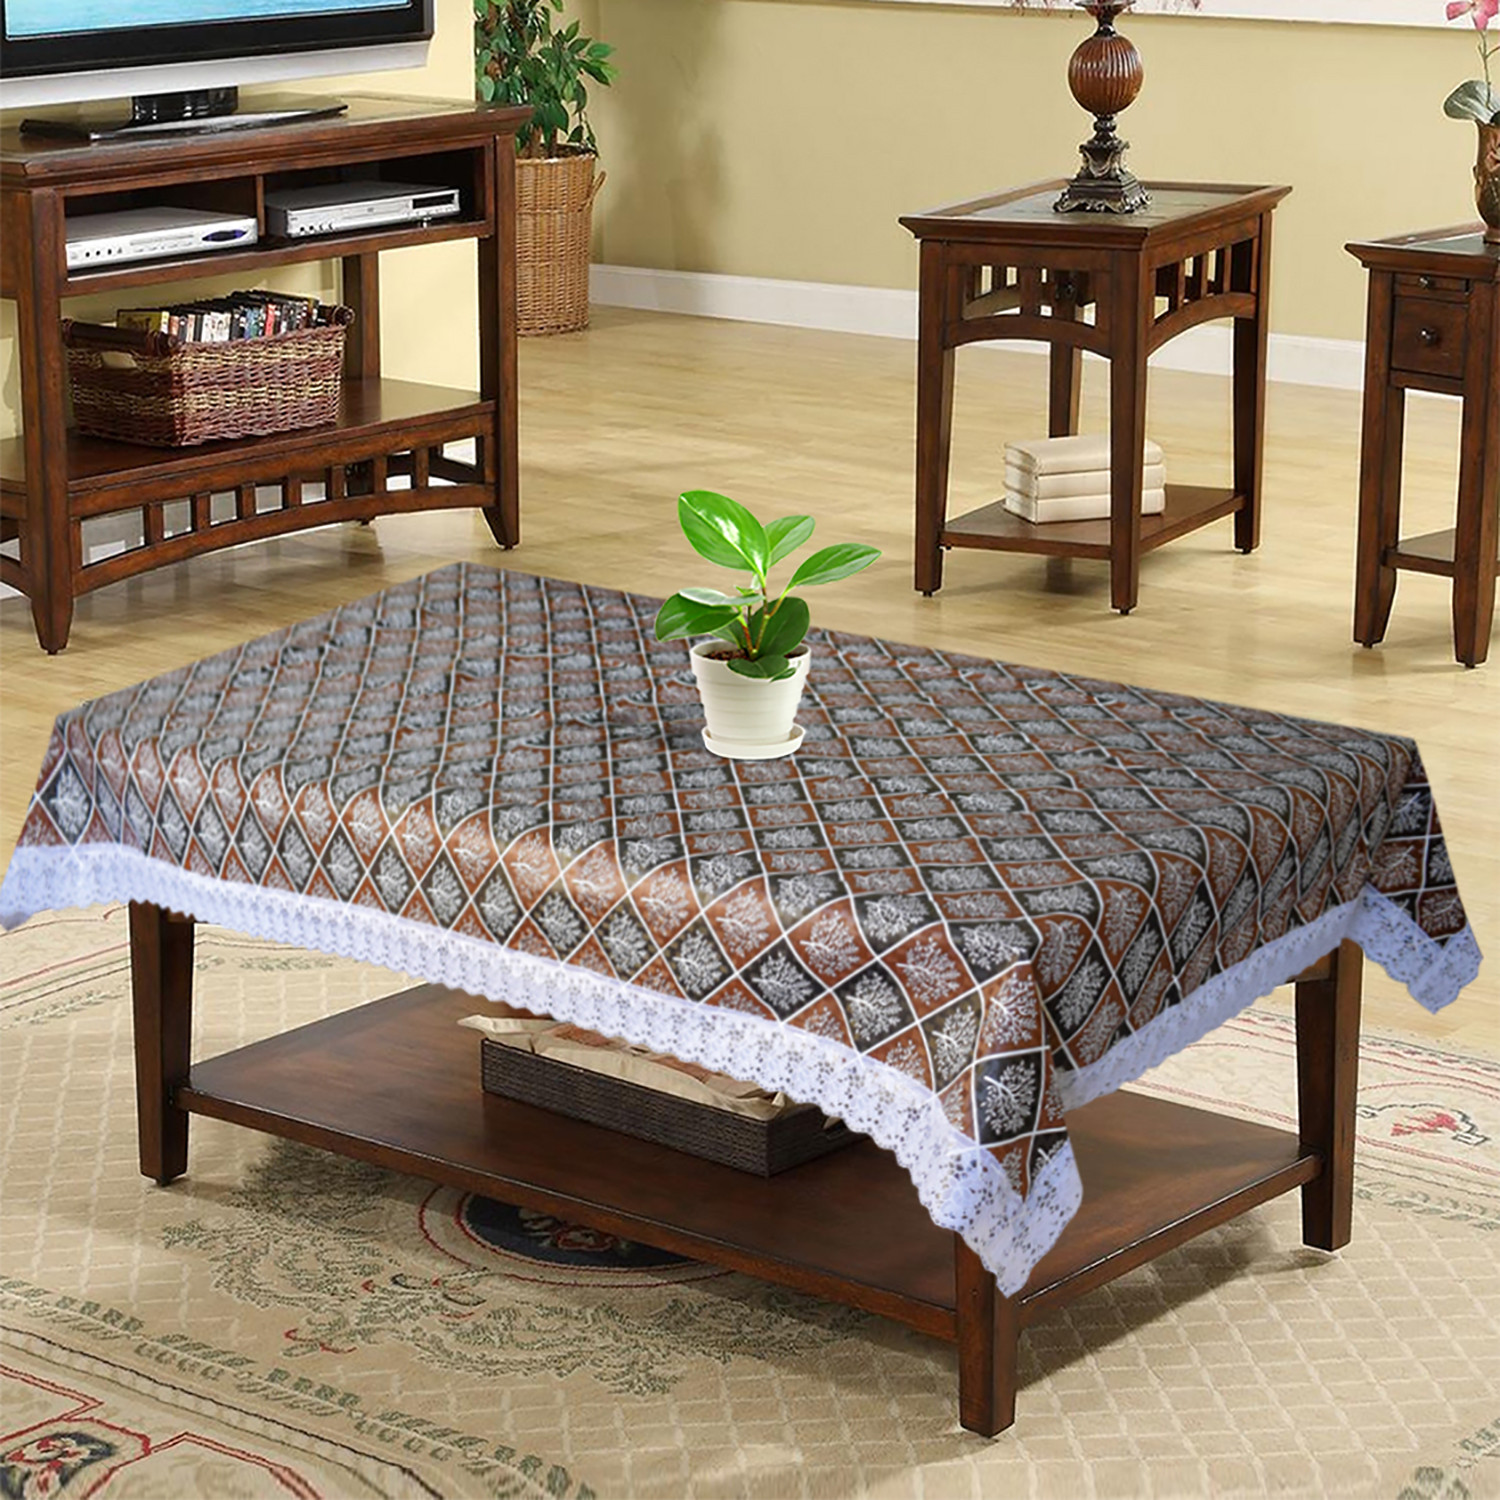 Kuber Industries Leaf Printed PVC 4 Seater Center Table Cover, Protector With White Lace Border, 40